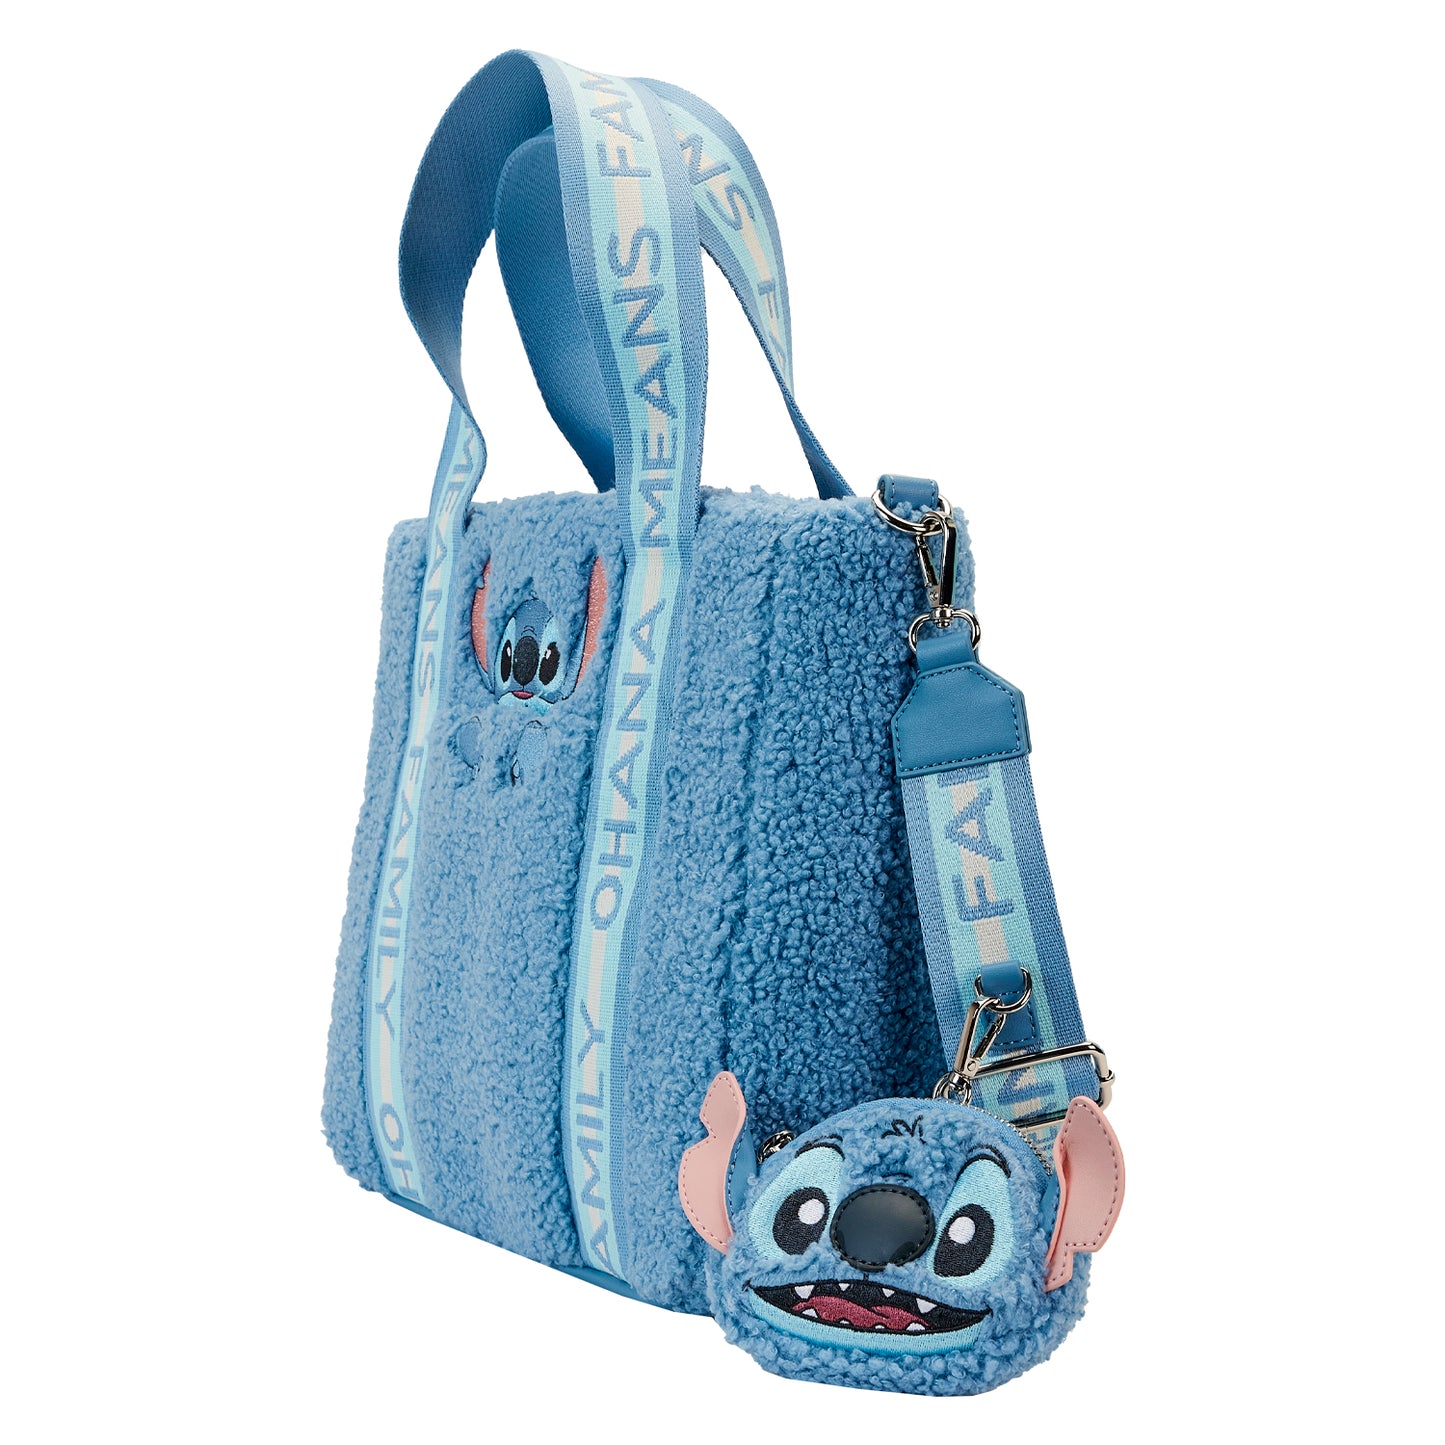 Stitch Plush Tote Bag with Coin Bag